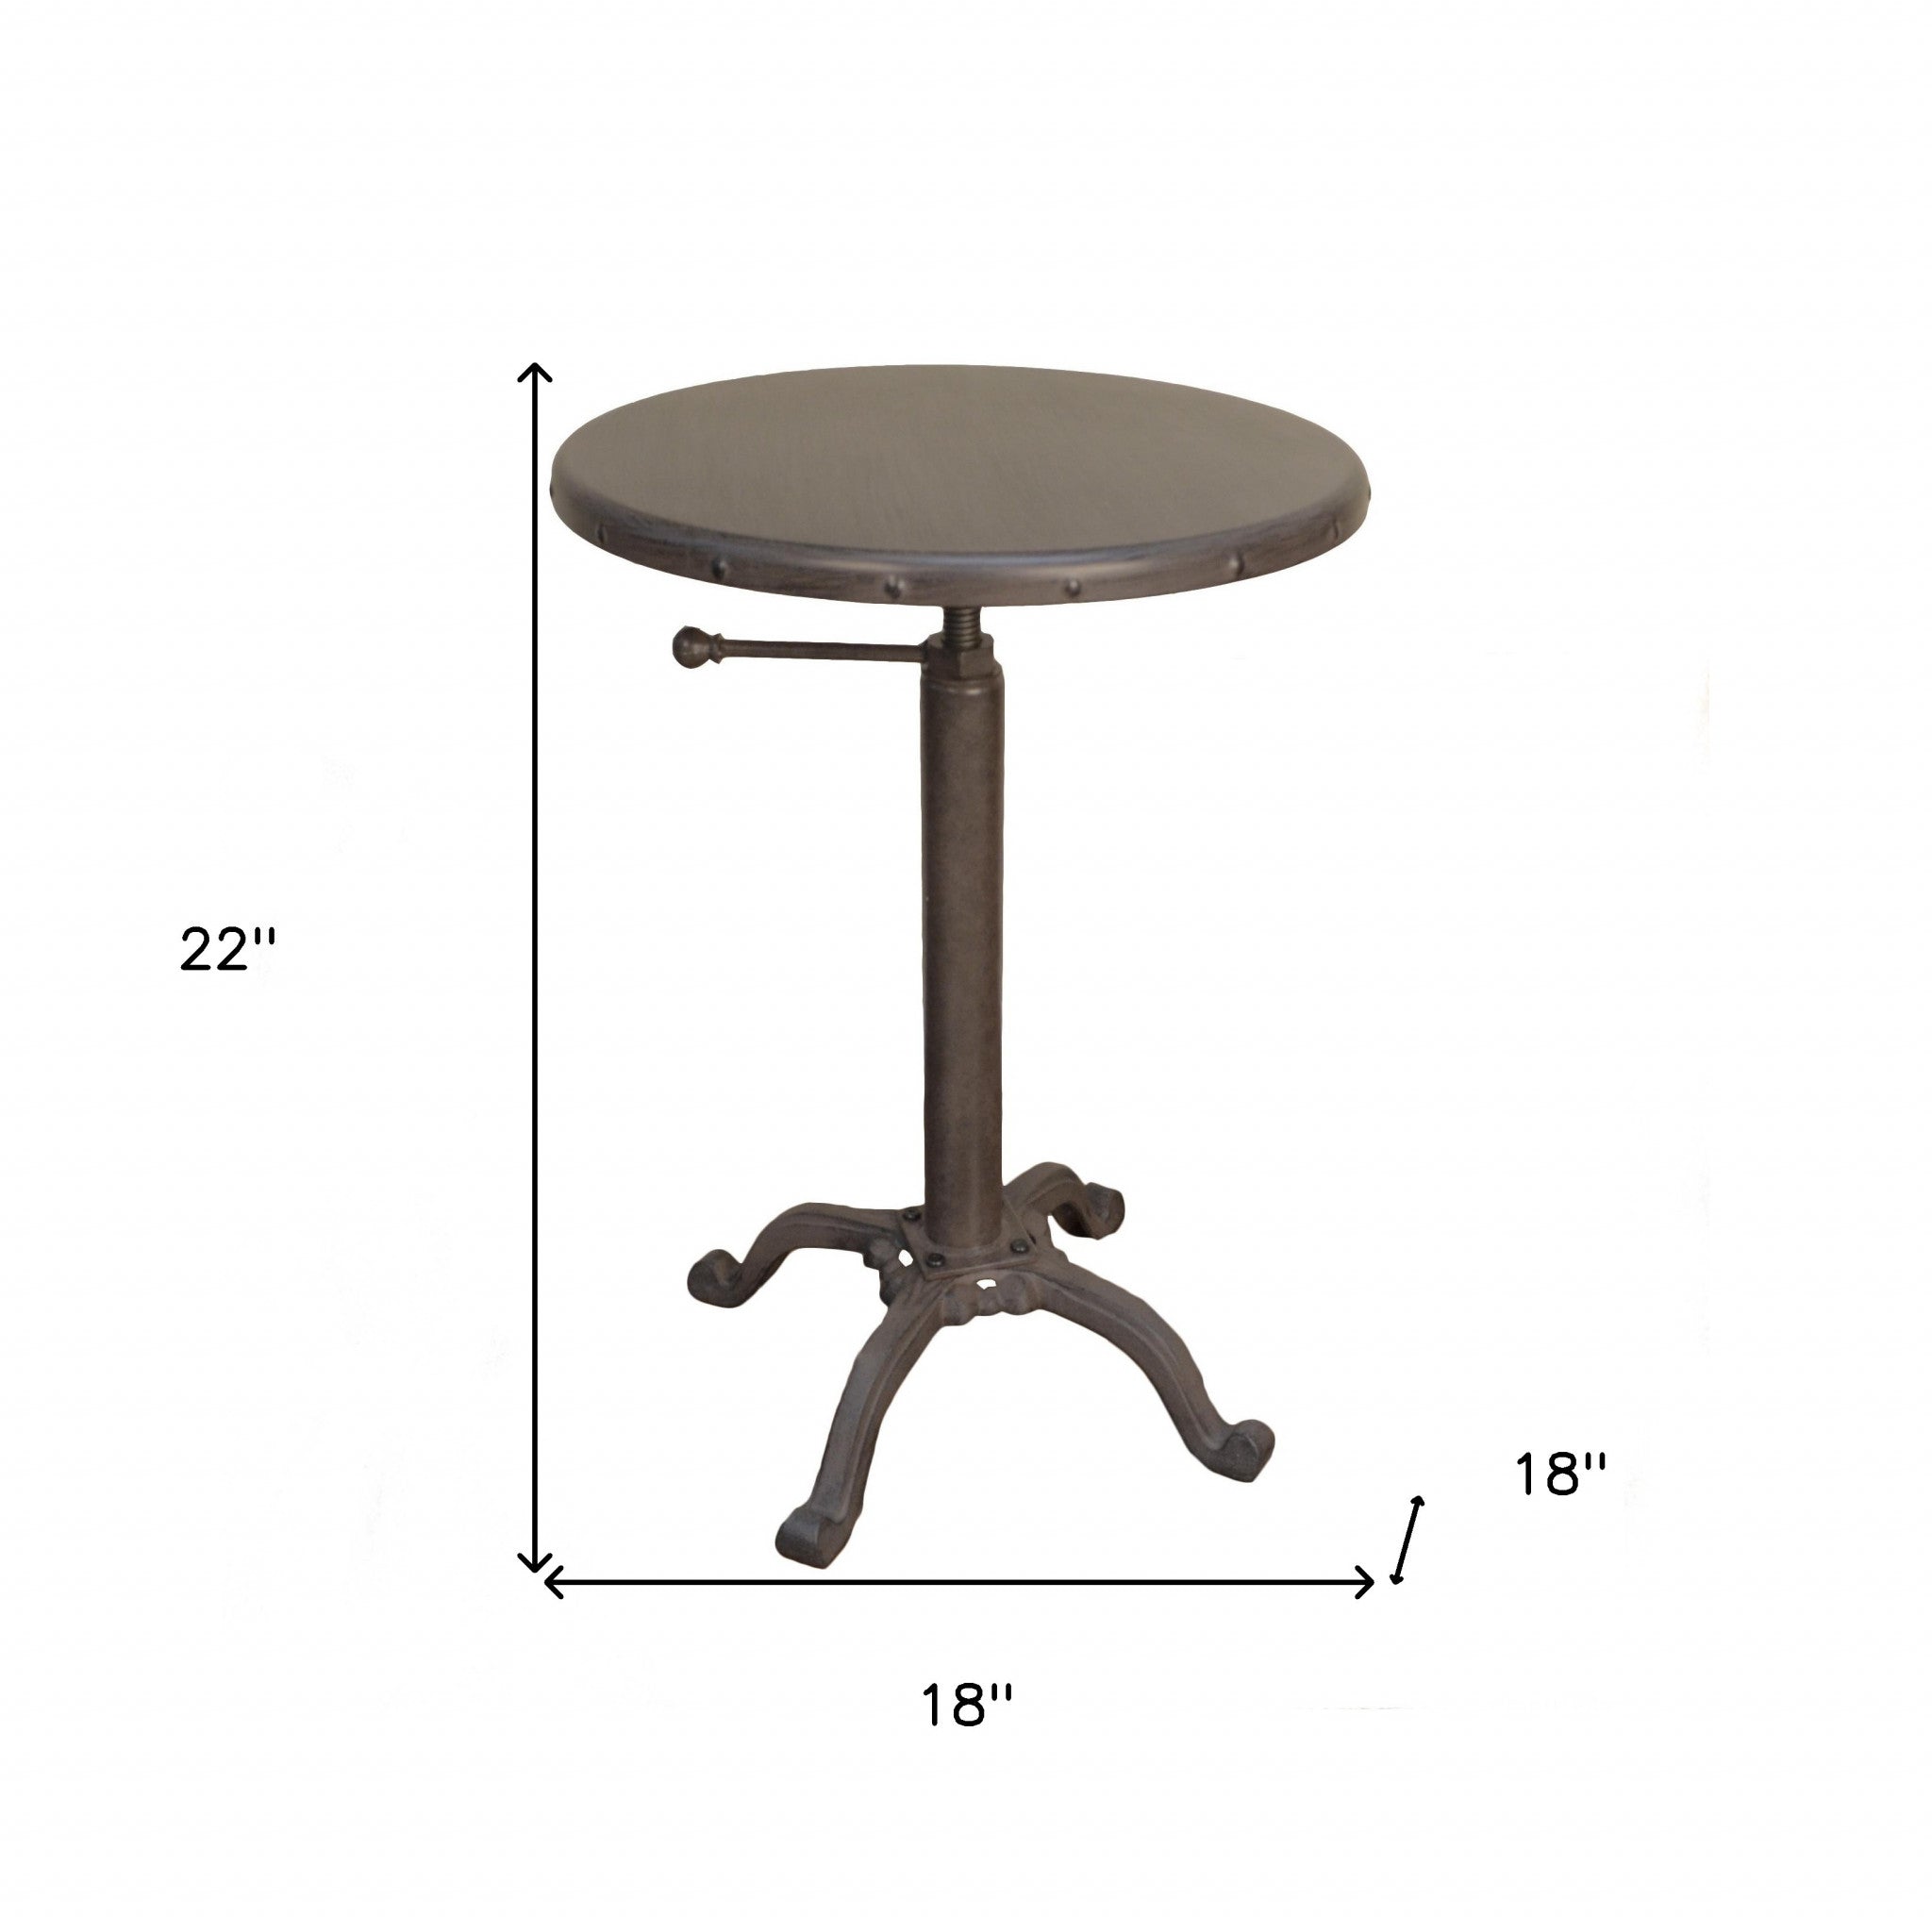 22" Industrial And Inustrial Iron Round End Table